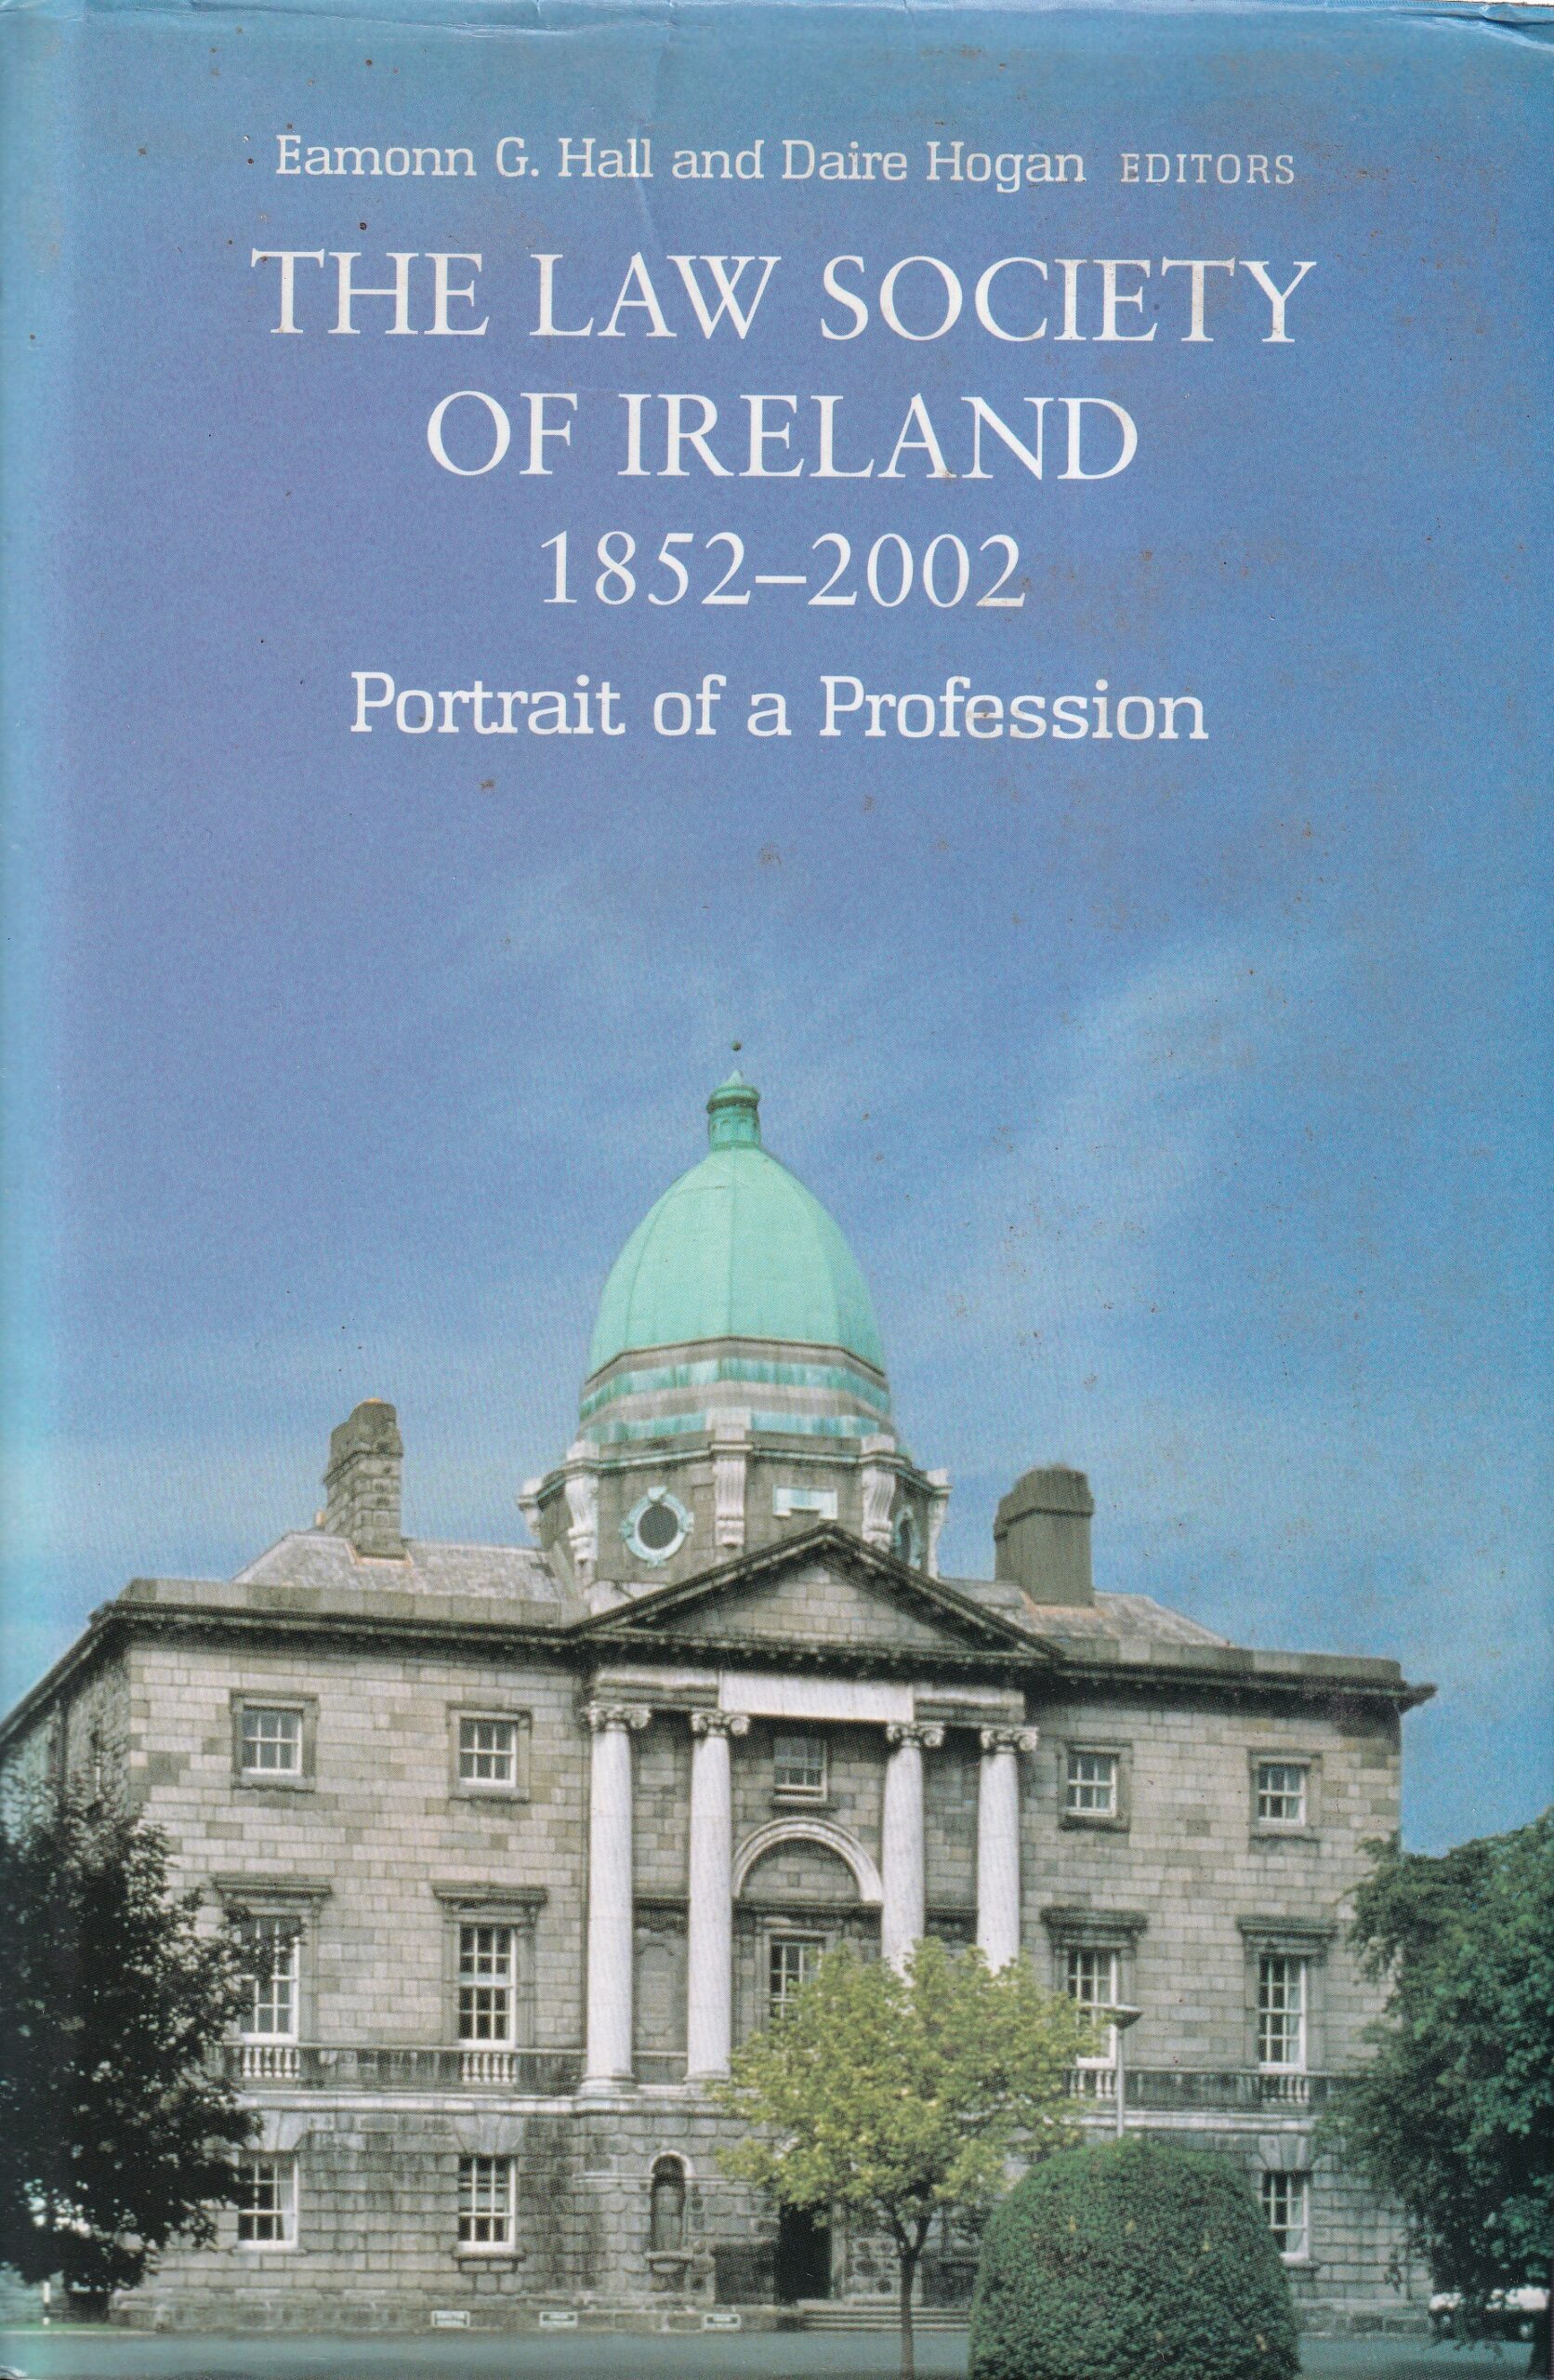 The Law Society of Ireland, 1852-2002: Portrait of a Profession by Eamonn G. Hall and Daire Hogan (eds.)